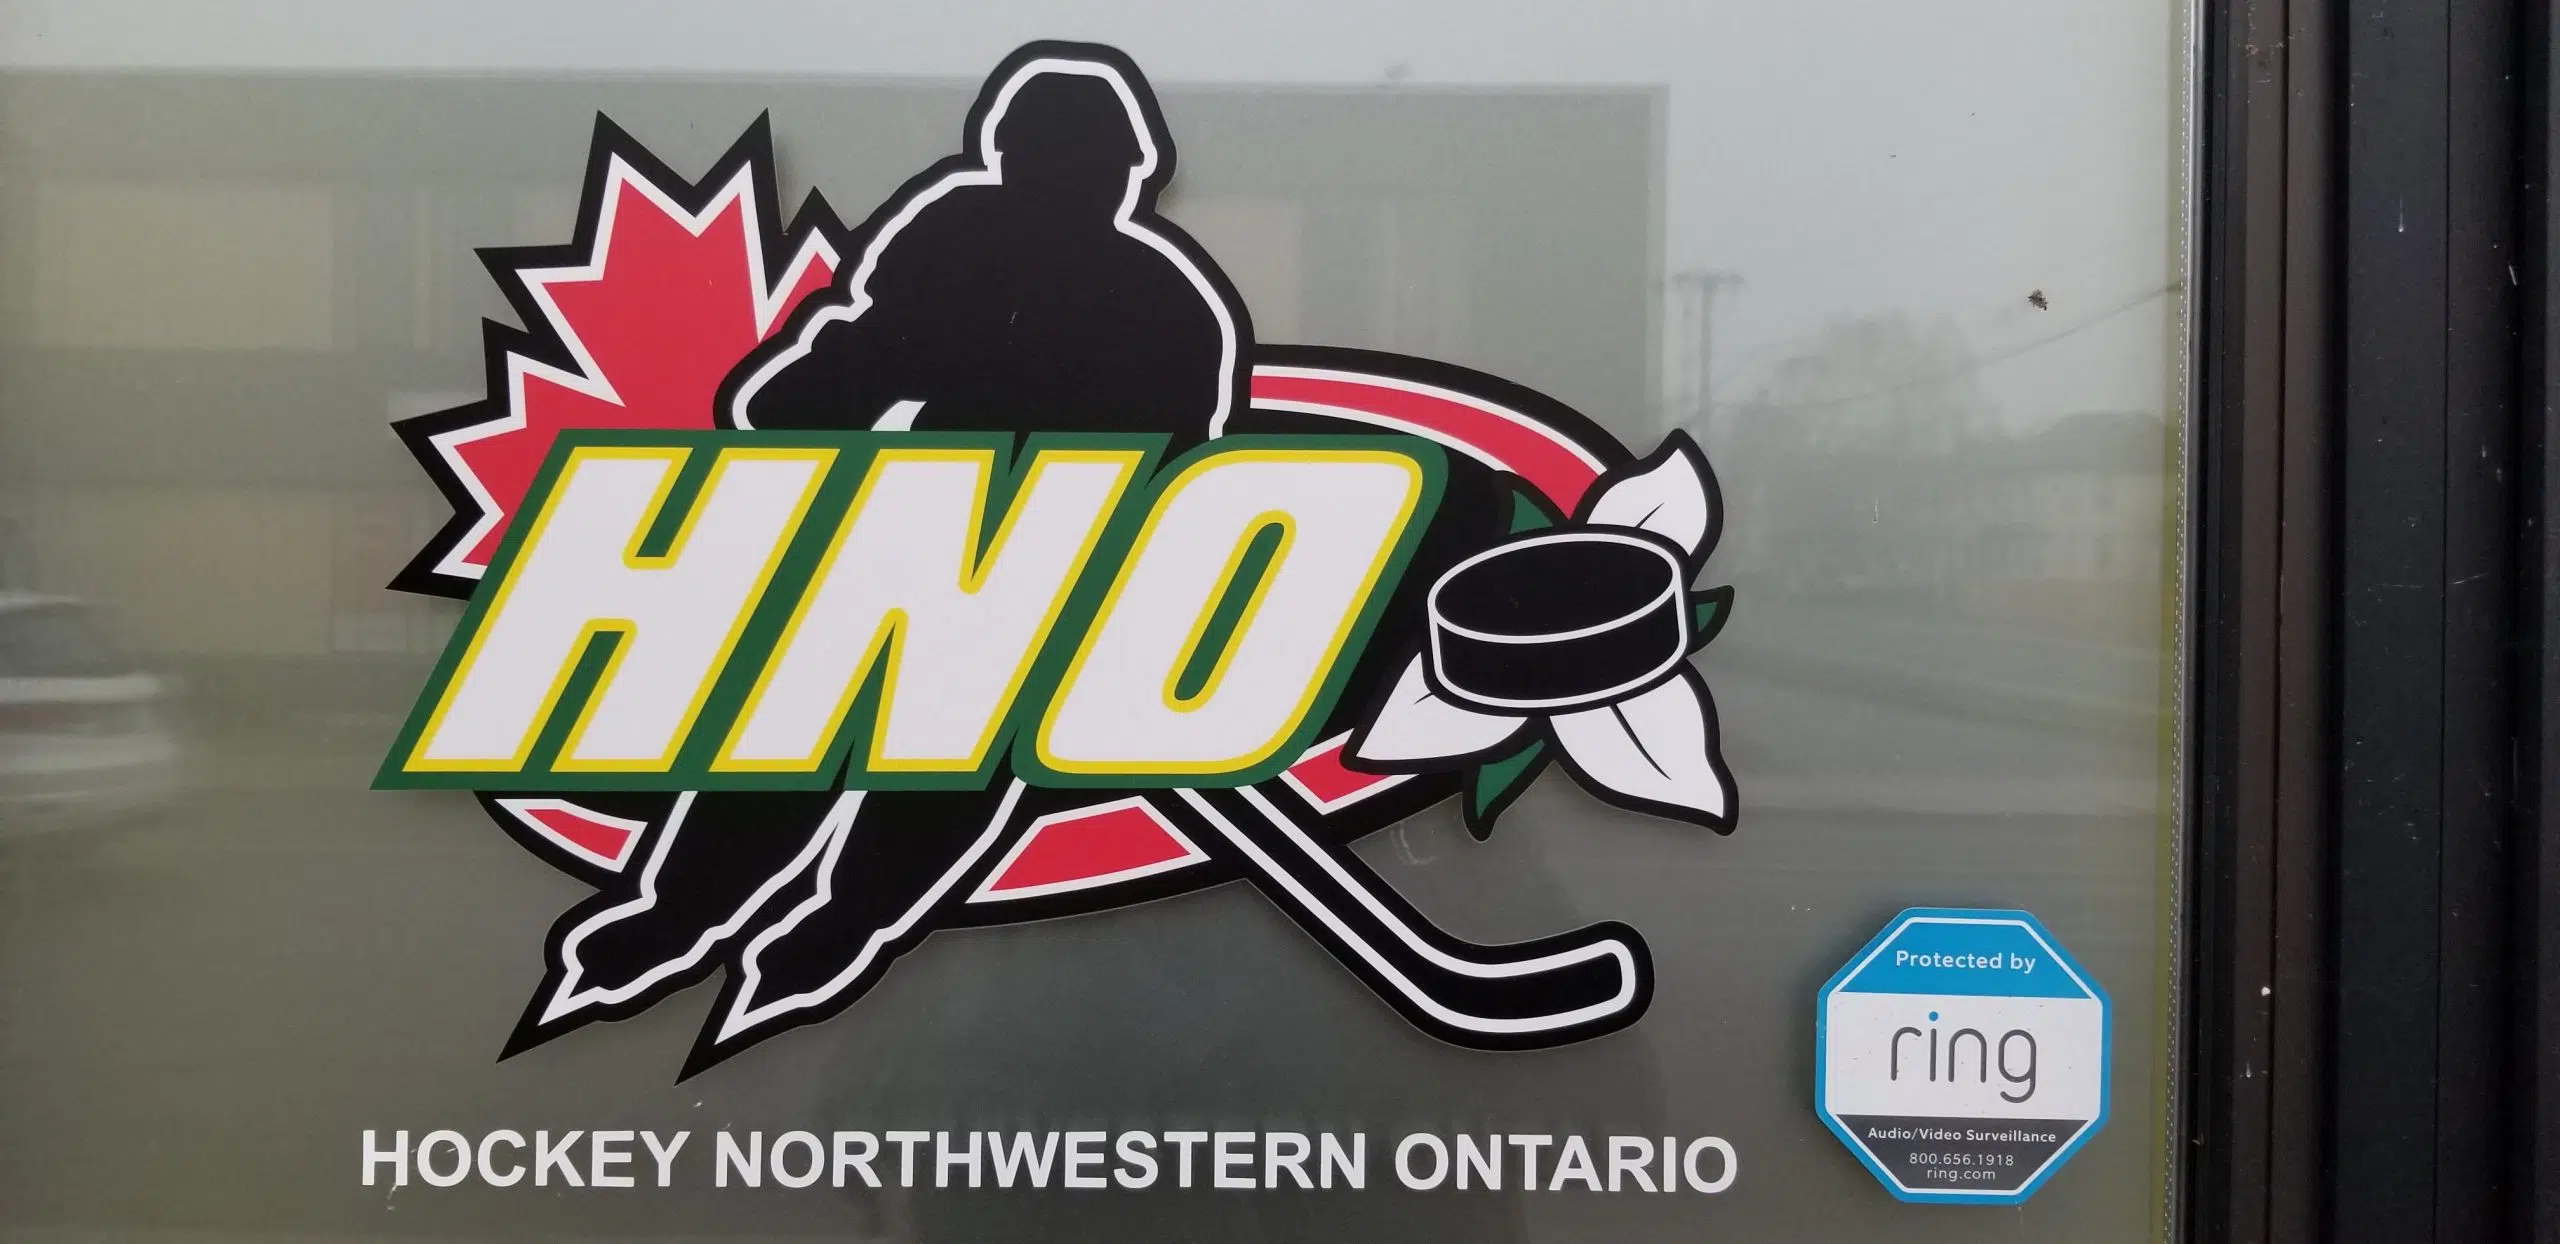 The HNO team of the day is - Hockey Northwestern Ontario